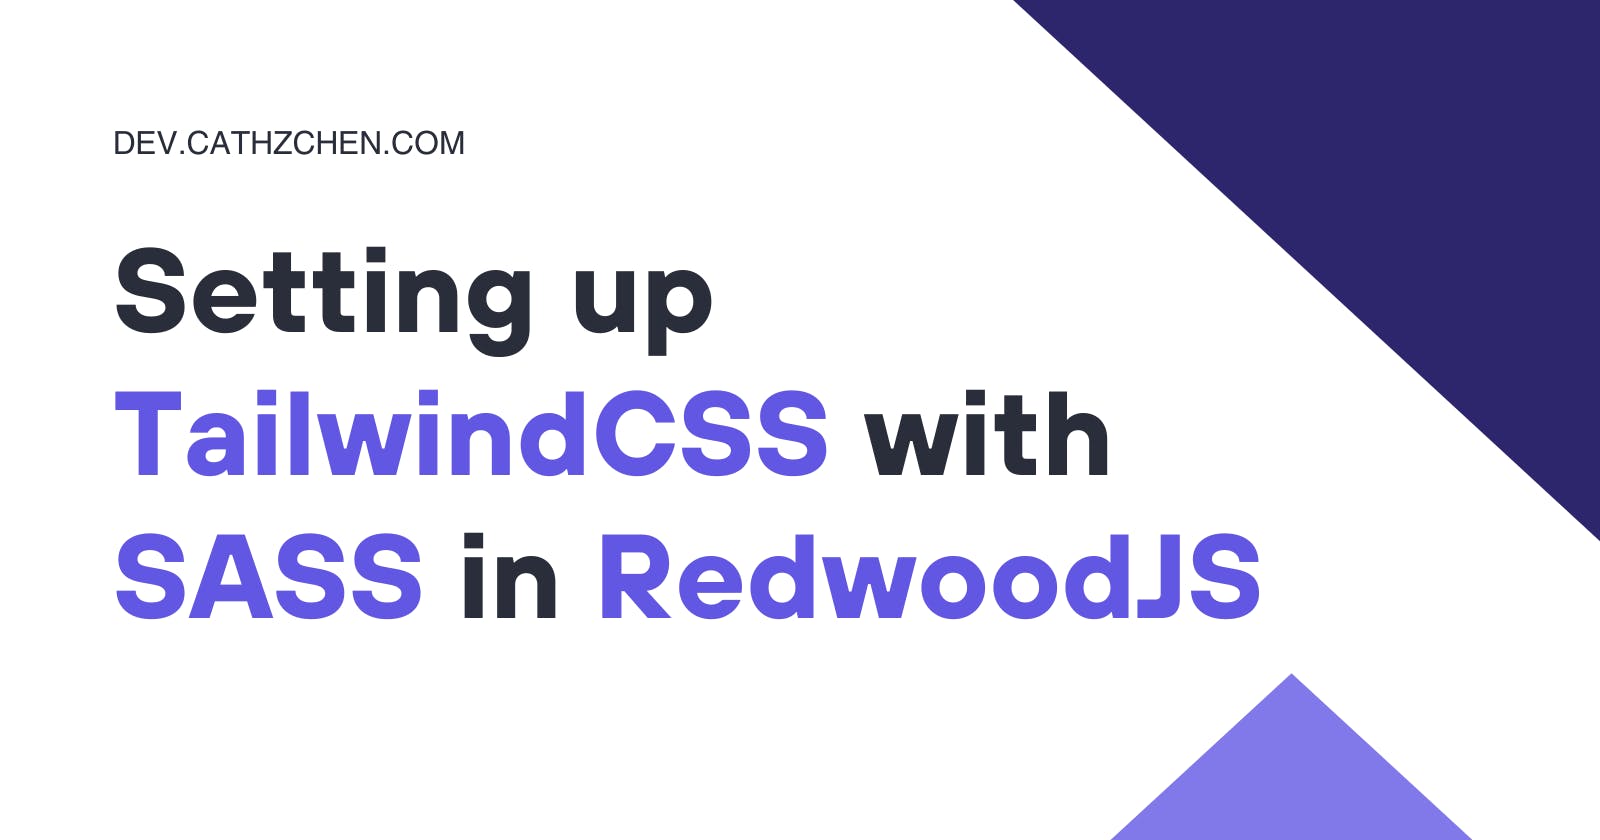 Setting up TailwindCSS with SASS in RedwoodJS